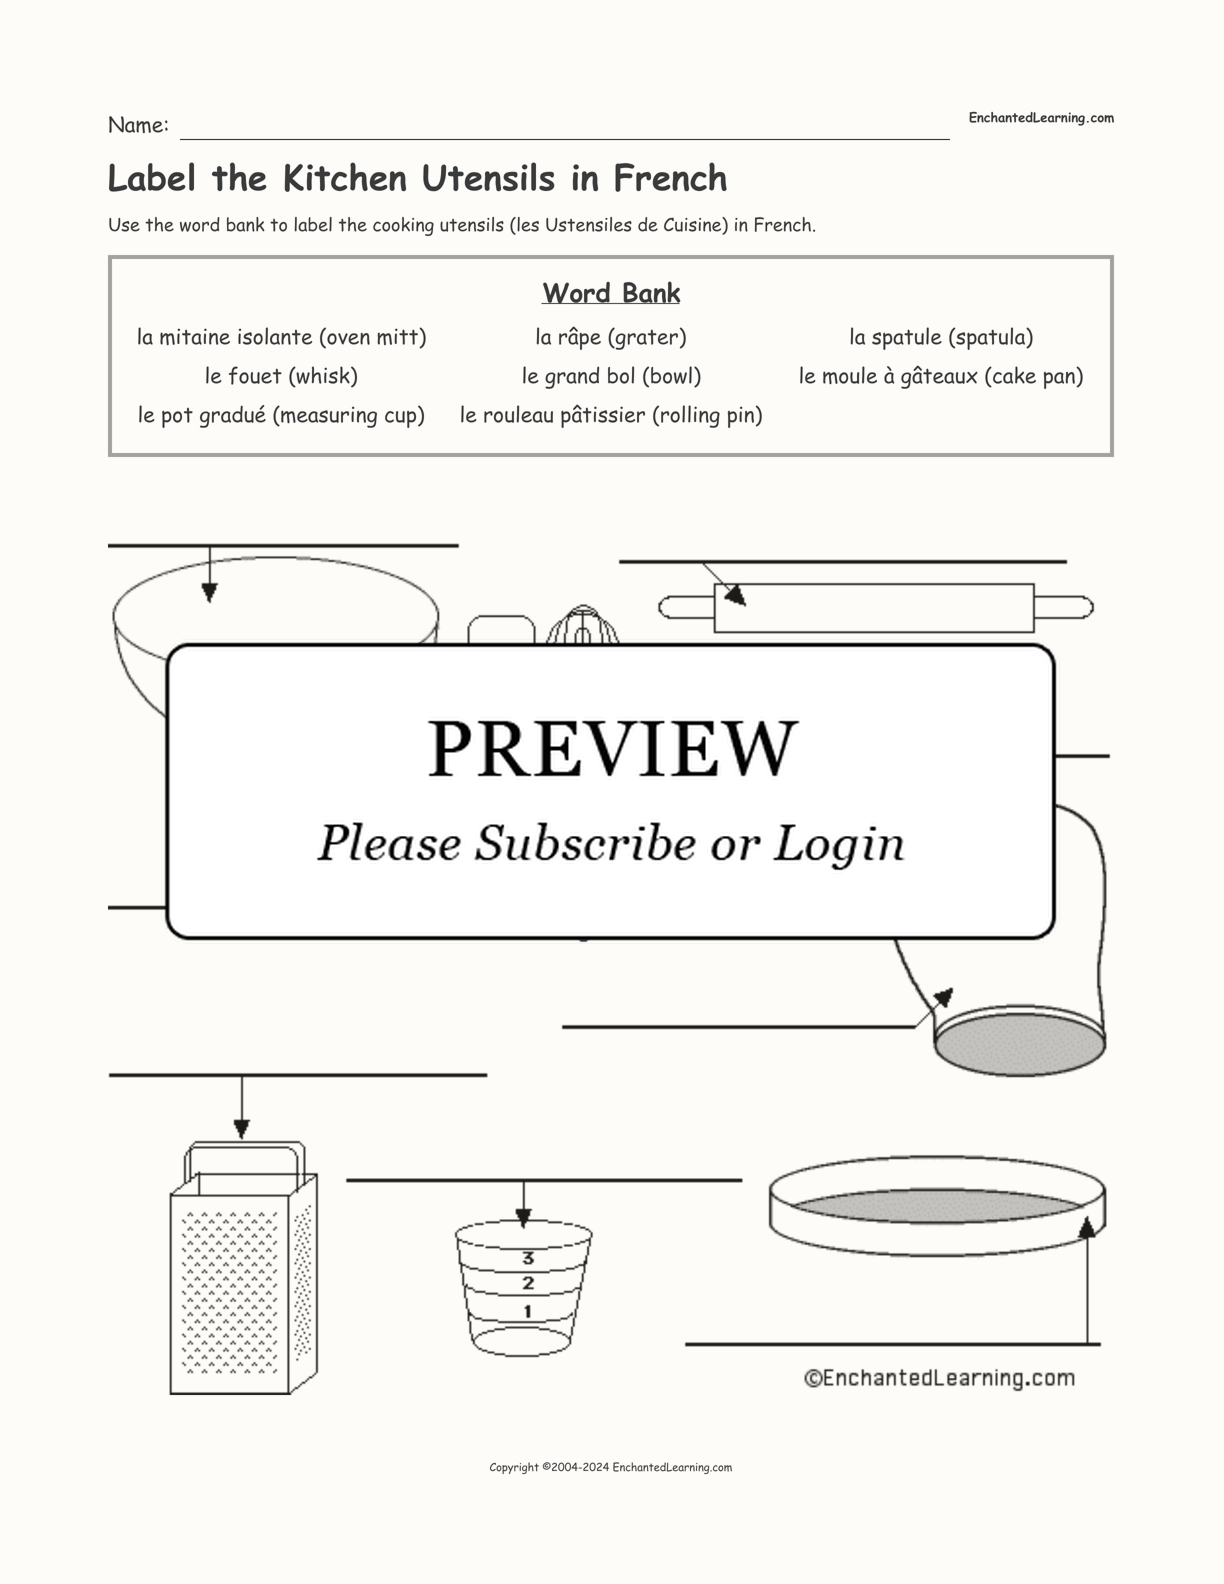 Label the Kitchen Utensils in French interactive worksheet page 1